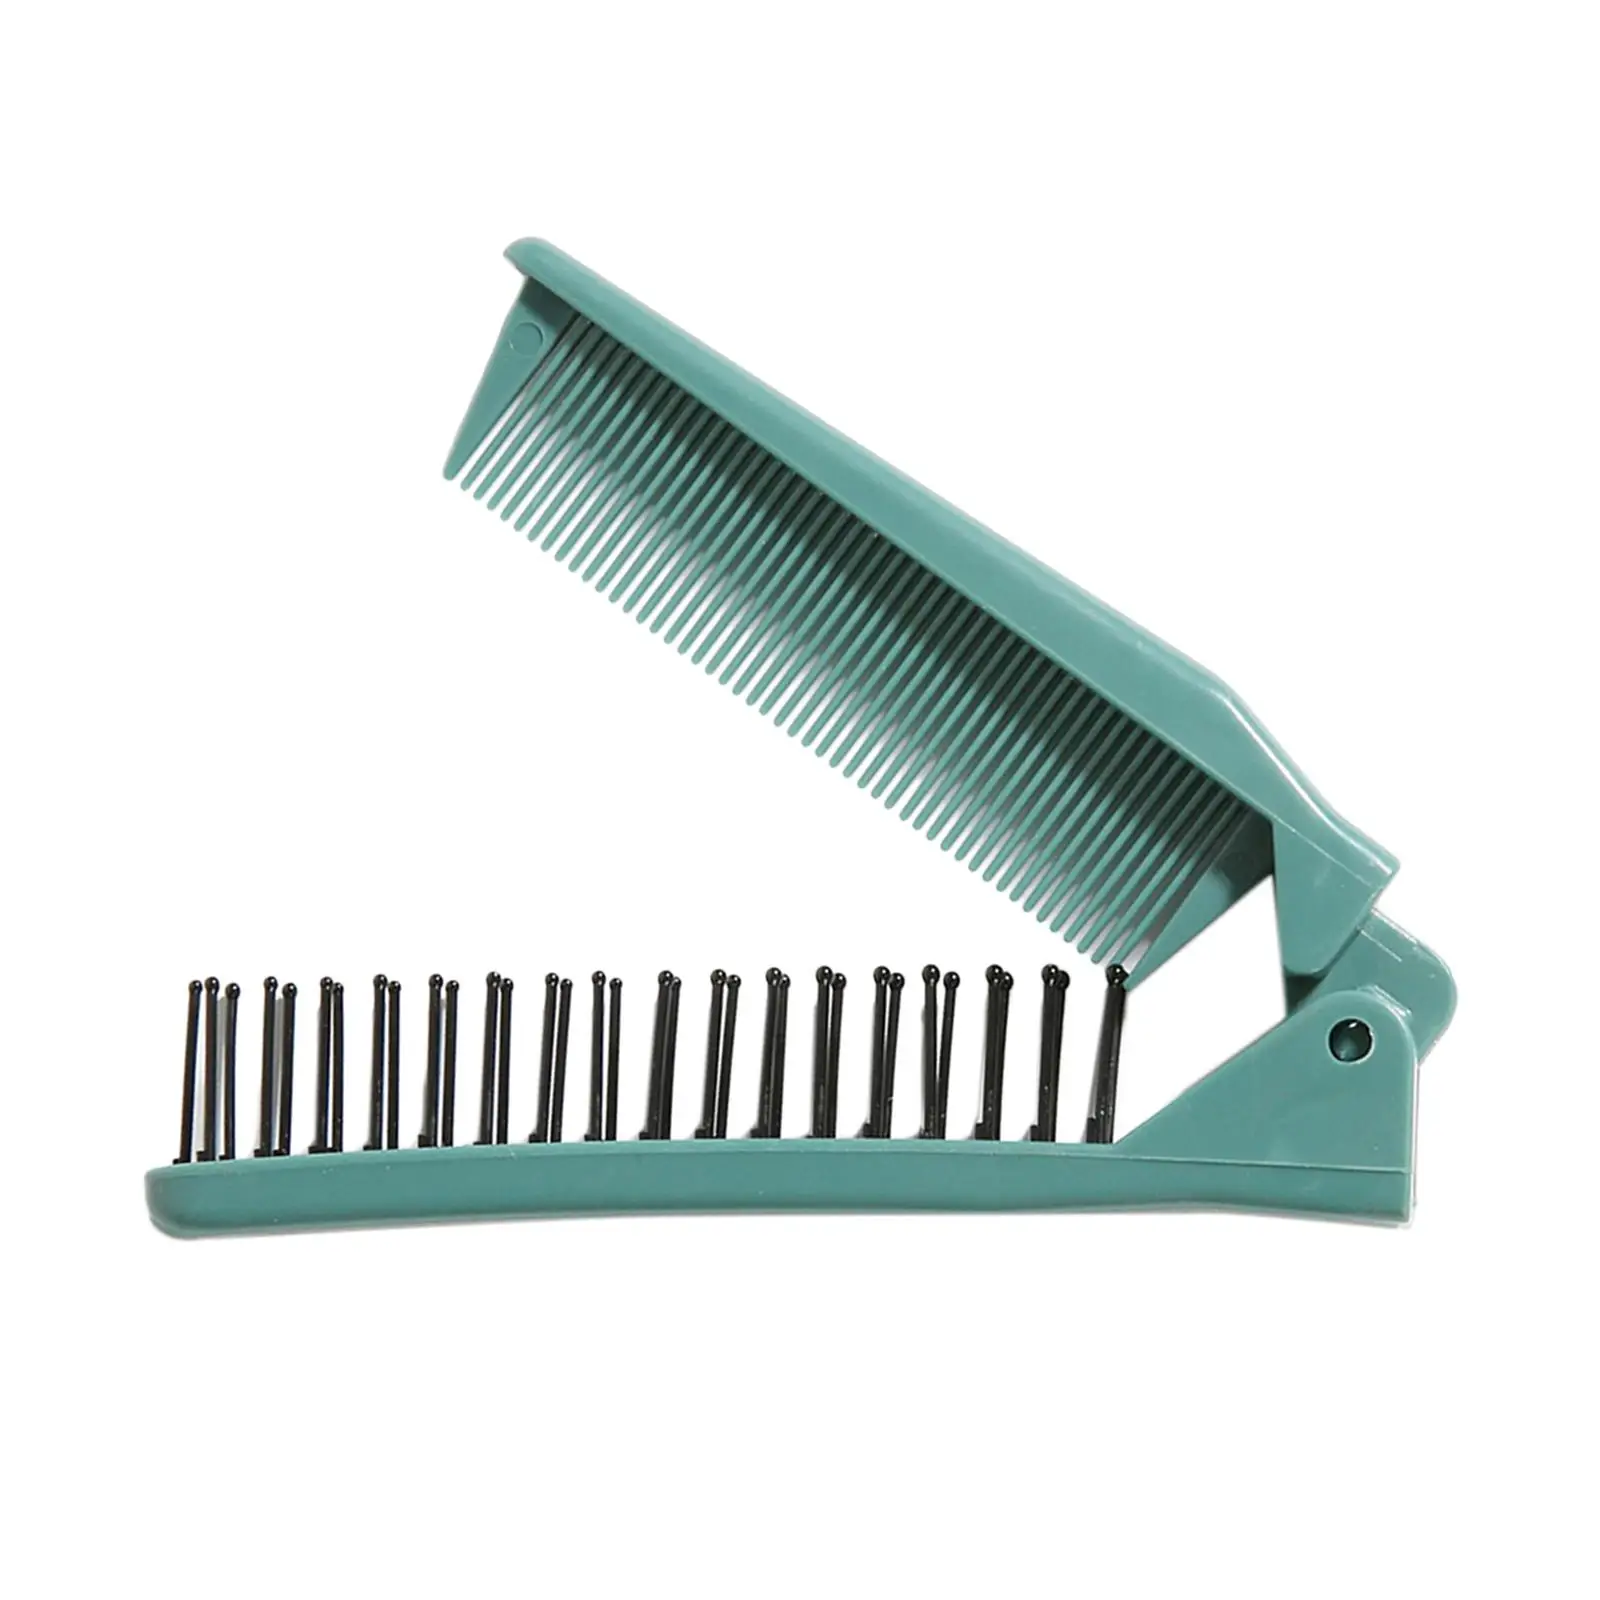 Foldable Hair Comb Hairdressing Styling Tool Portable Folding Comb Double Headed Hairbrush for Home Salon Men travel